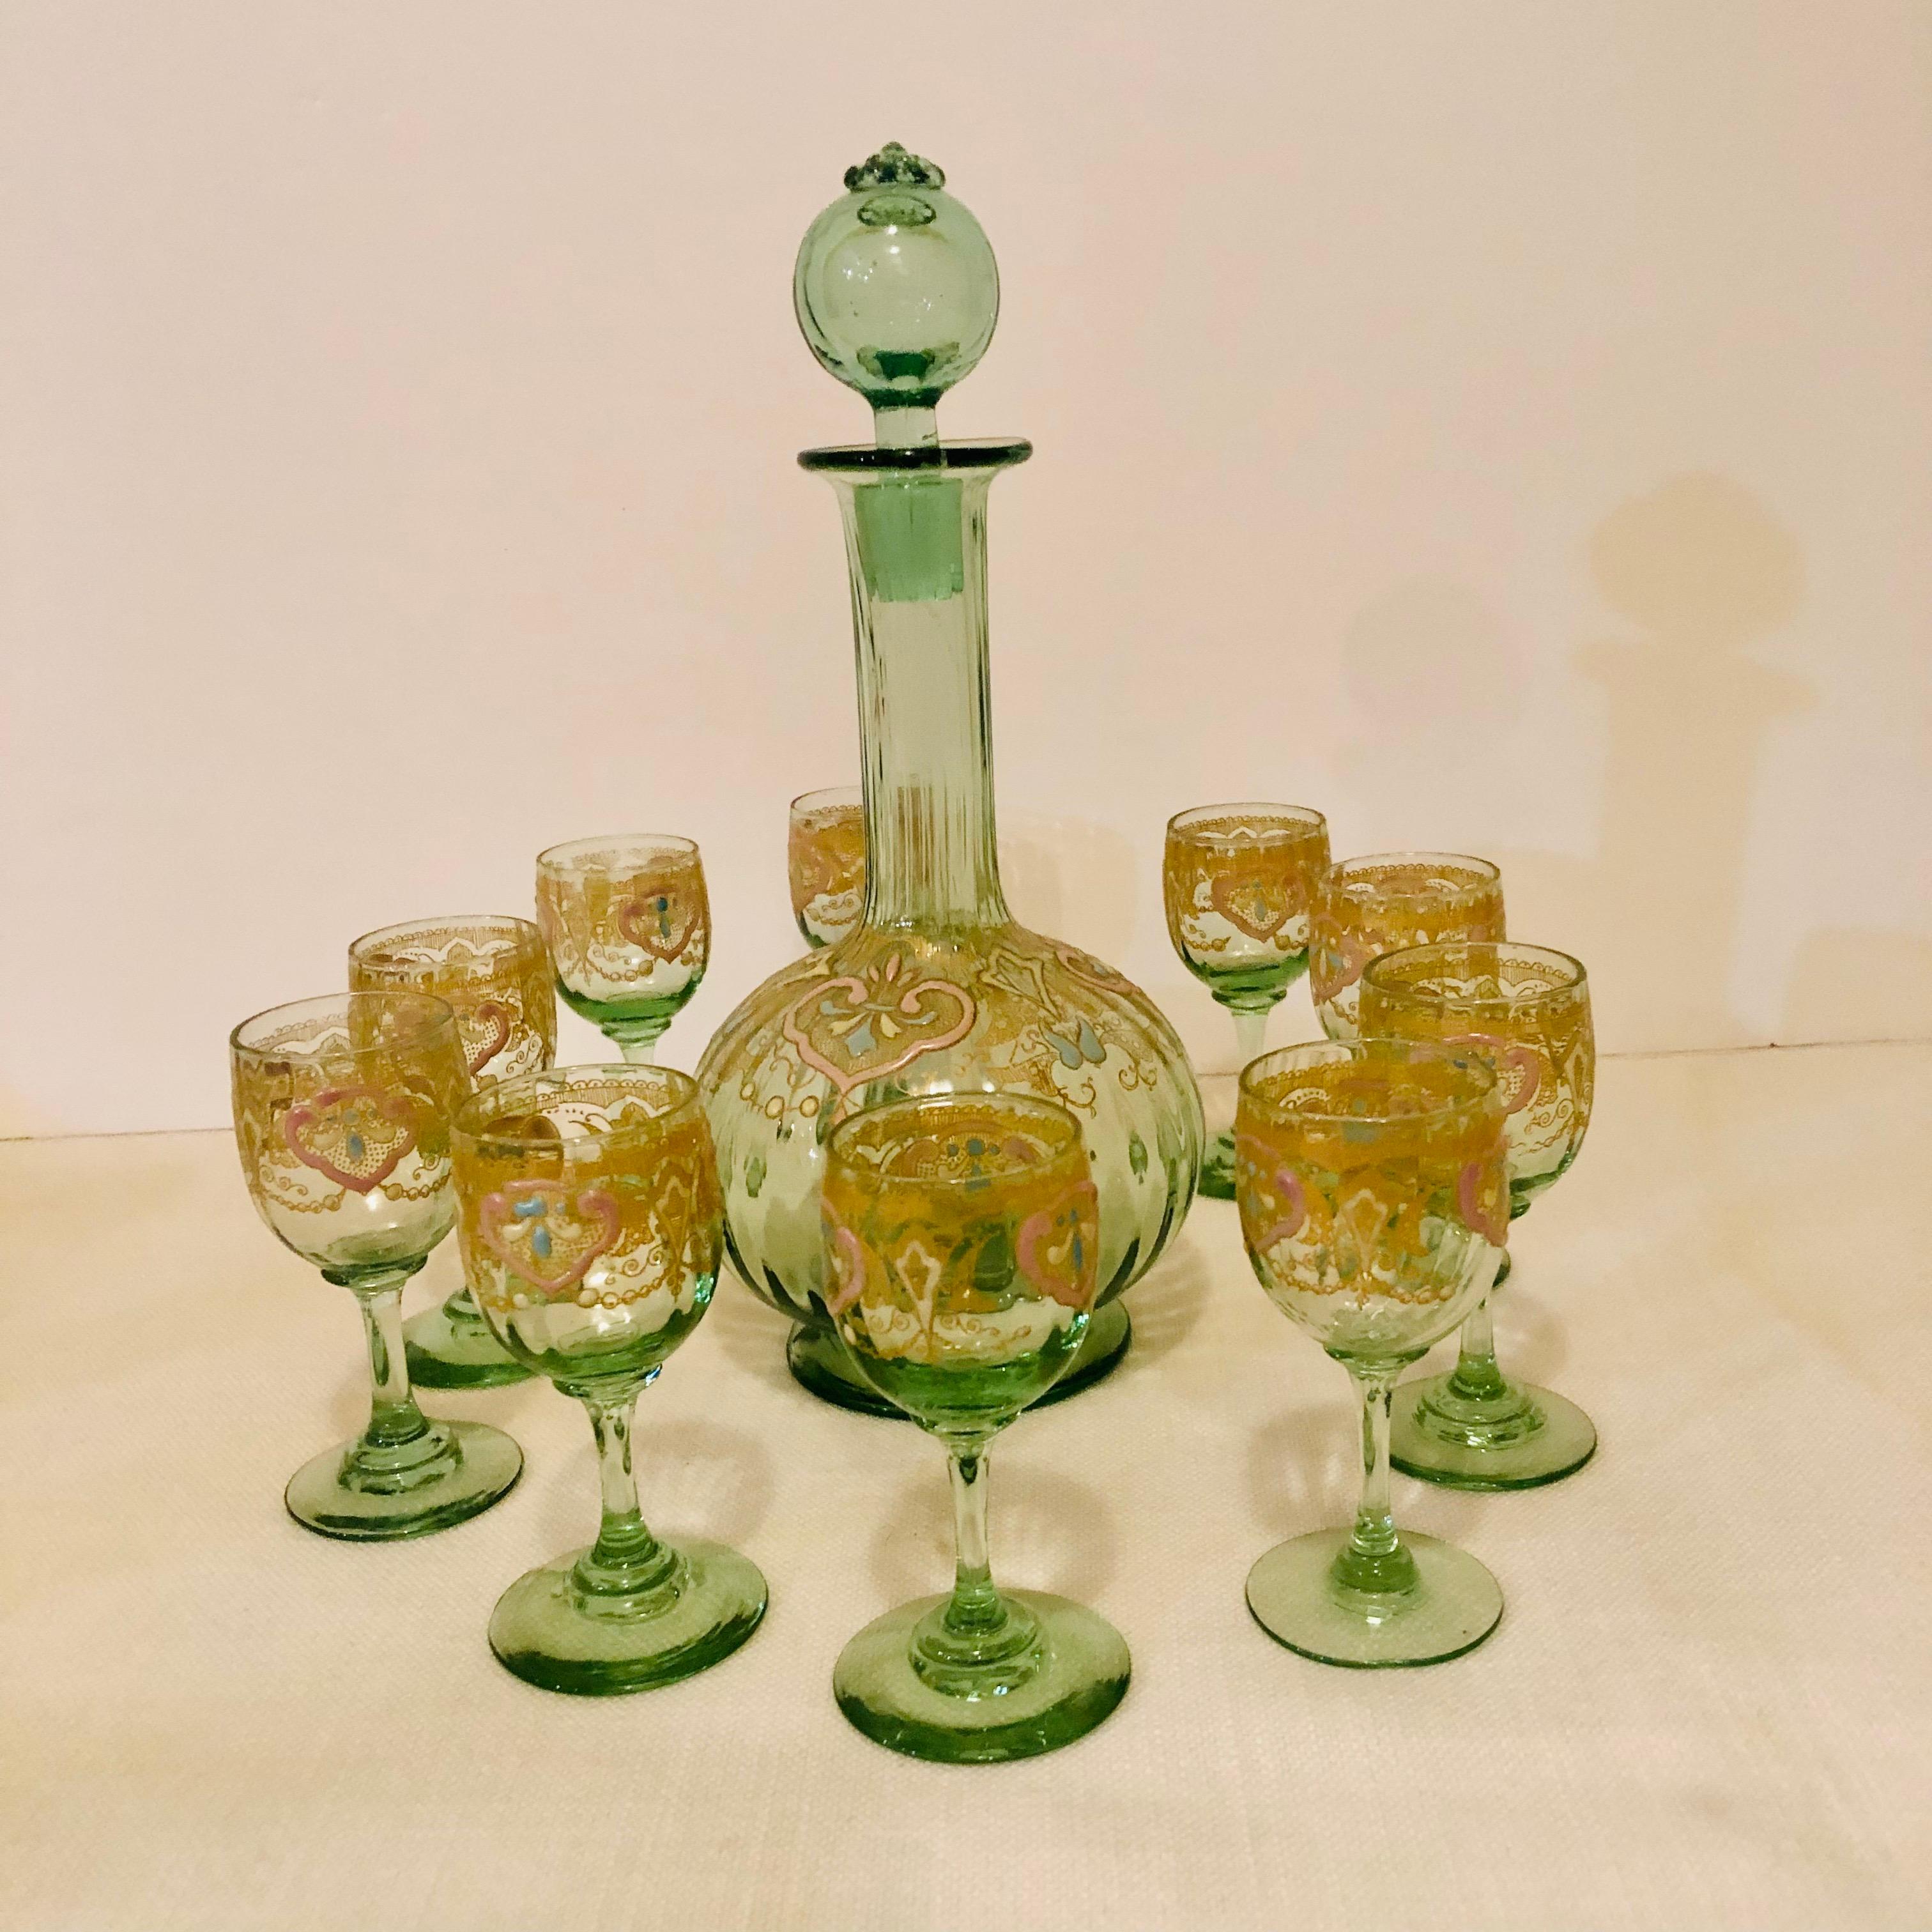 This is a beautiful set of Venetian green glass with a decanter and ten cordial glasses. Each piece is decorated with colorful enamel accents in pink, blue and cream colors, as well as gilt embellishments on the green glass ground as you can see in